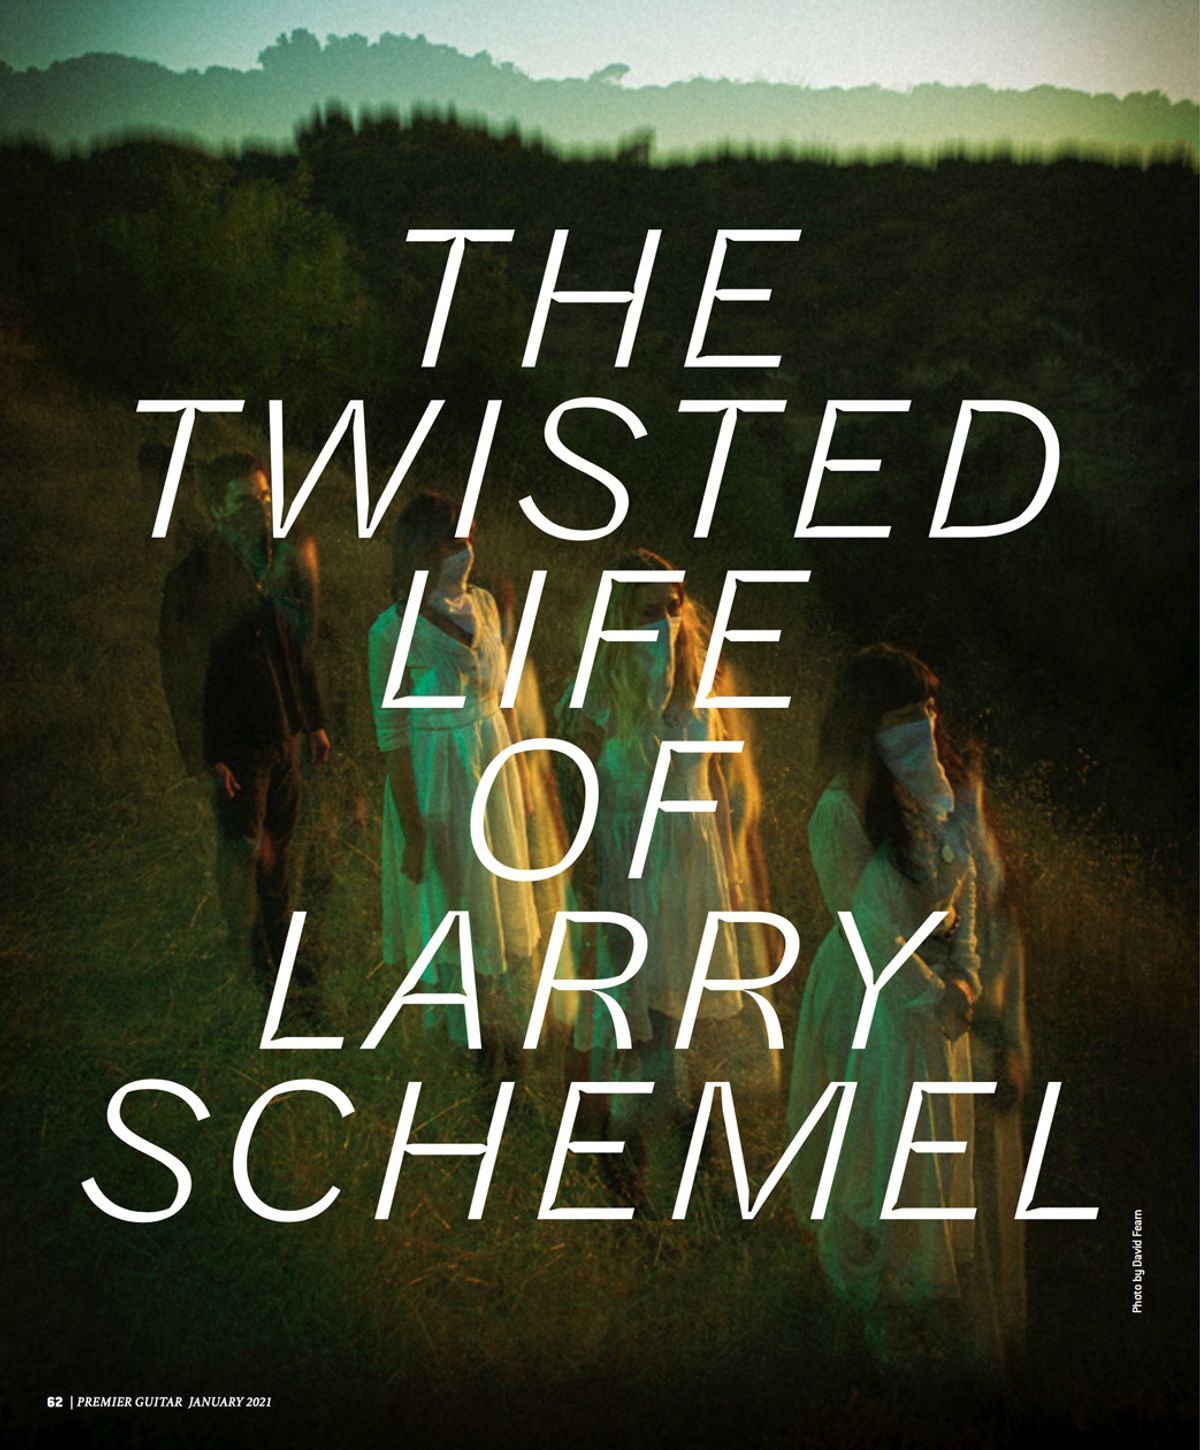 The Twisted Life of Larry Schemel